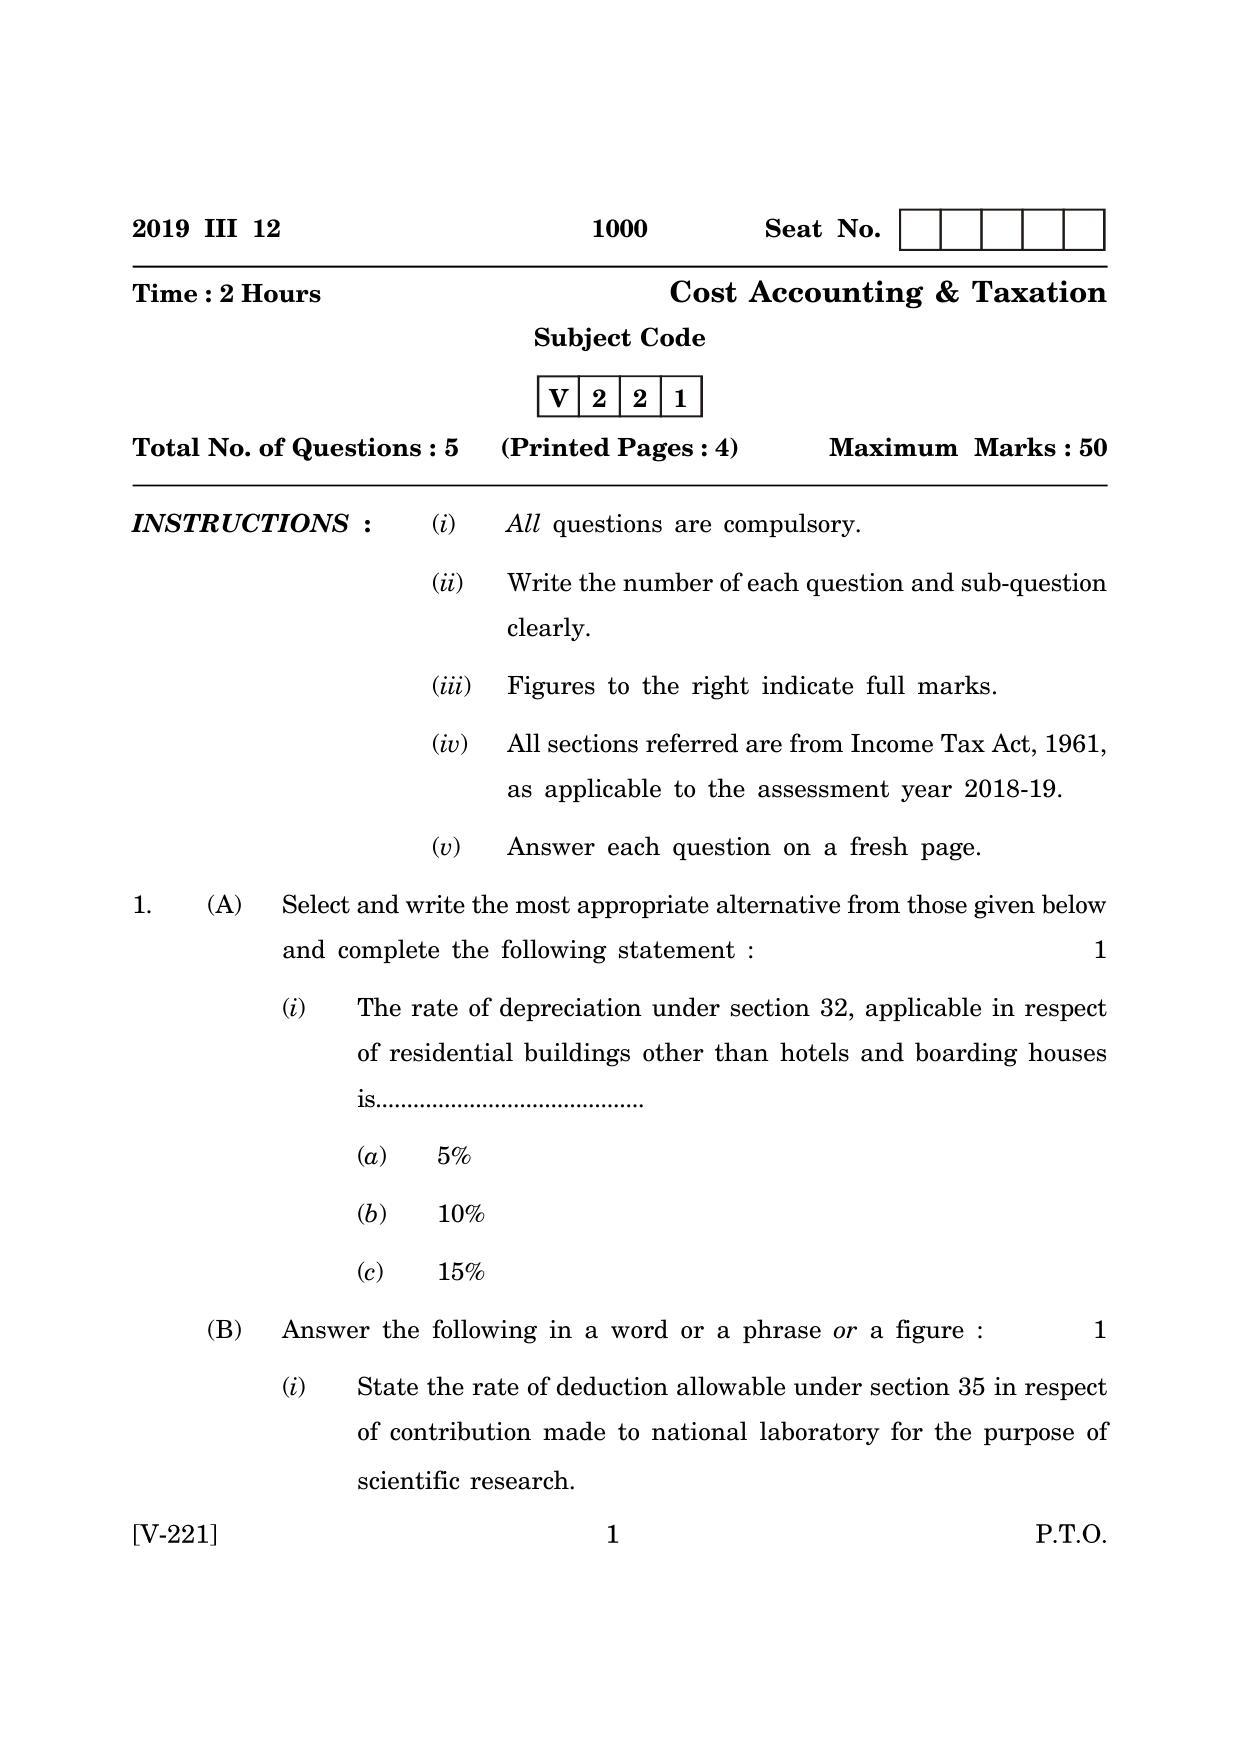 Goa Board Class 12 Cost Accounting & Taxation  2019 (March 2019) Question Paper - Page 1